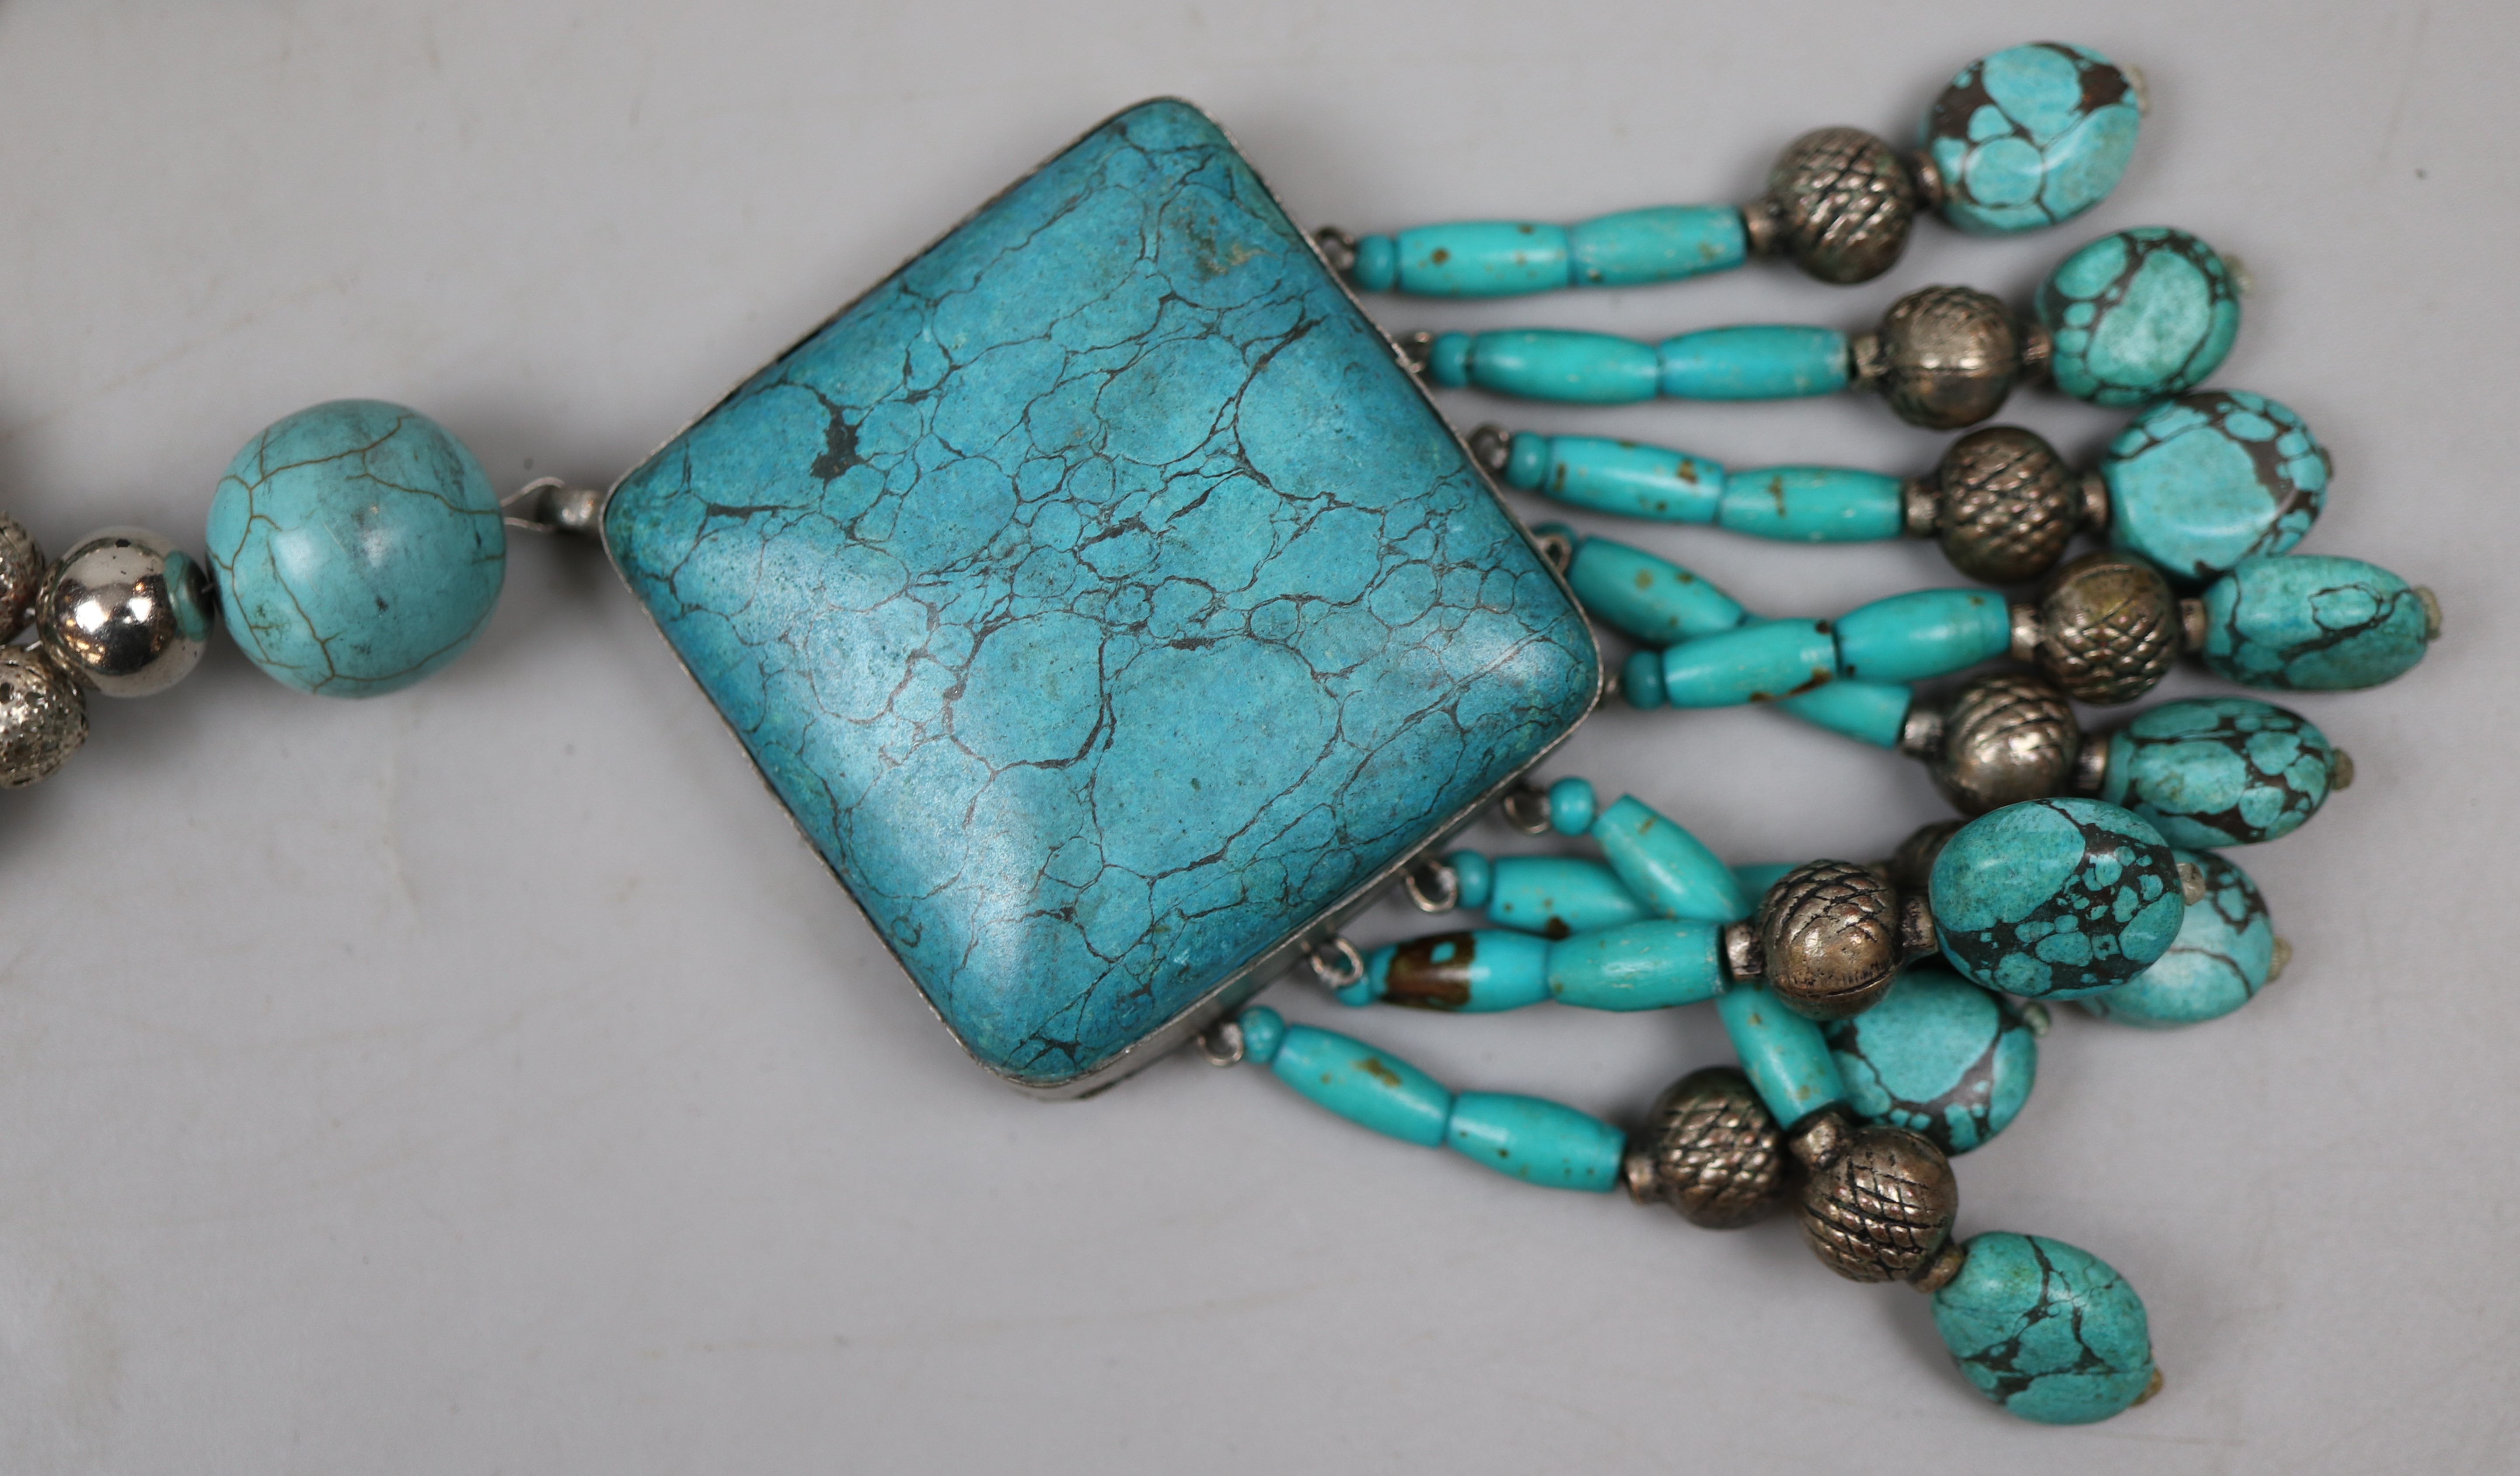 Vintage Himalayan / Tibet silver & turquoise necklaces - Image 3 of 7